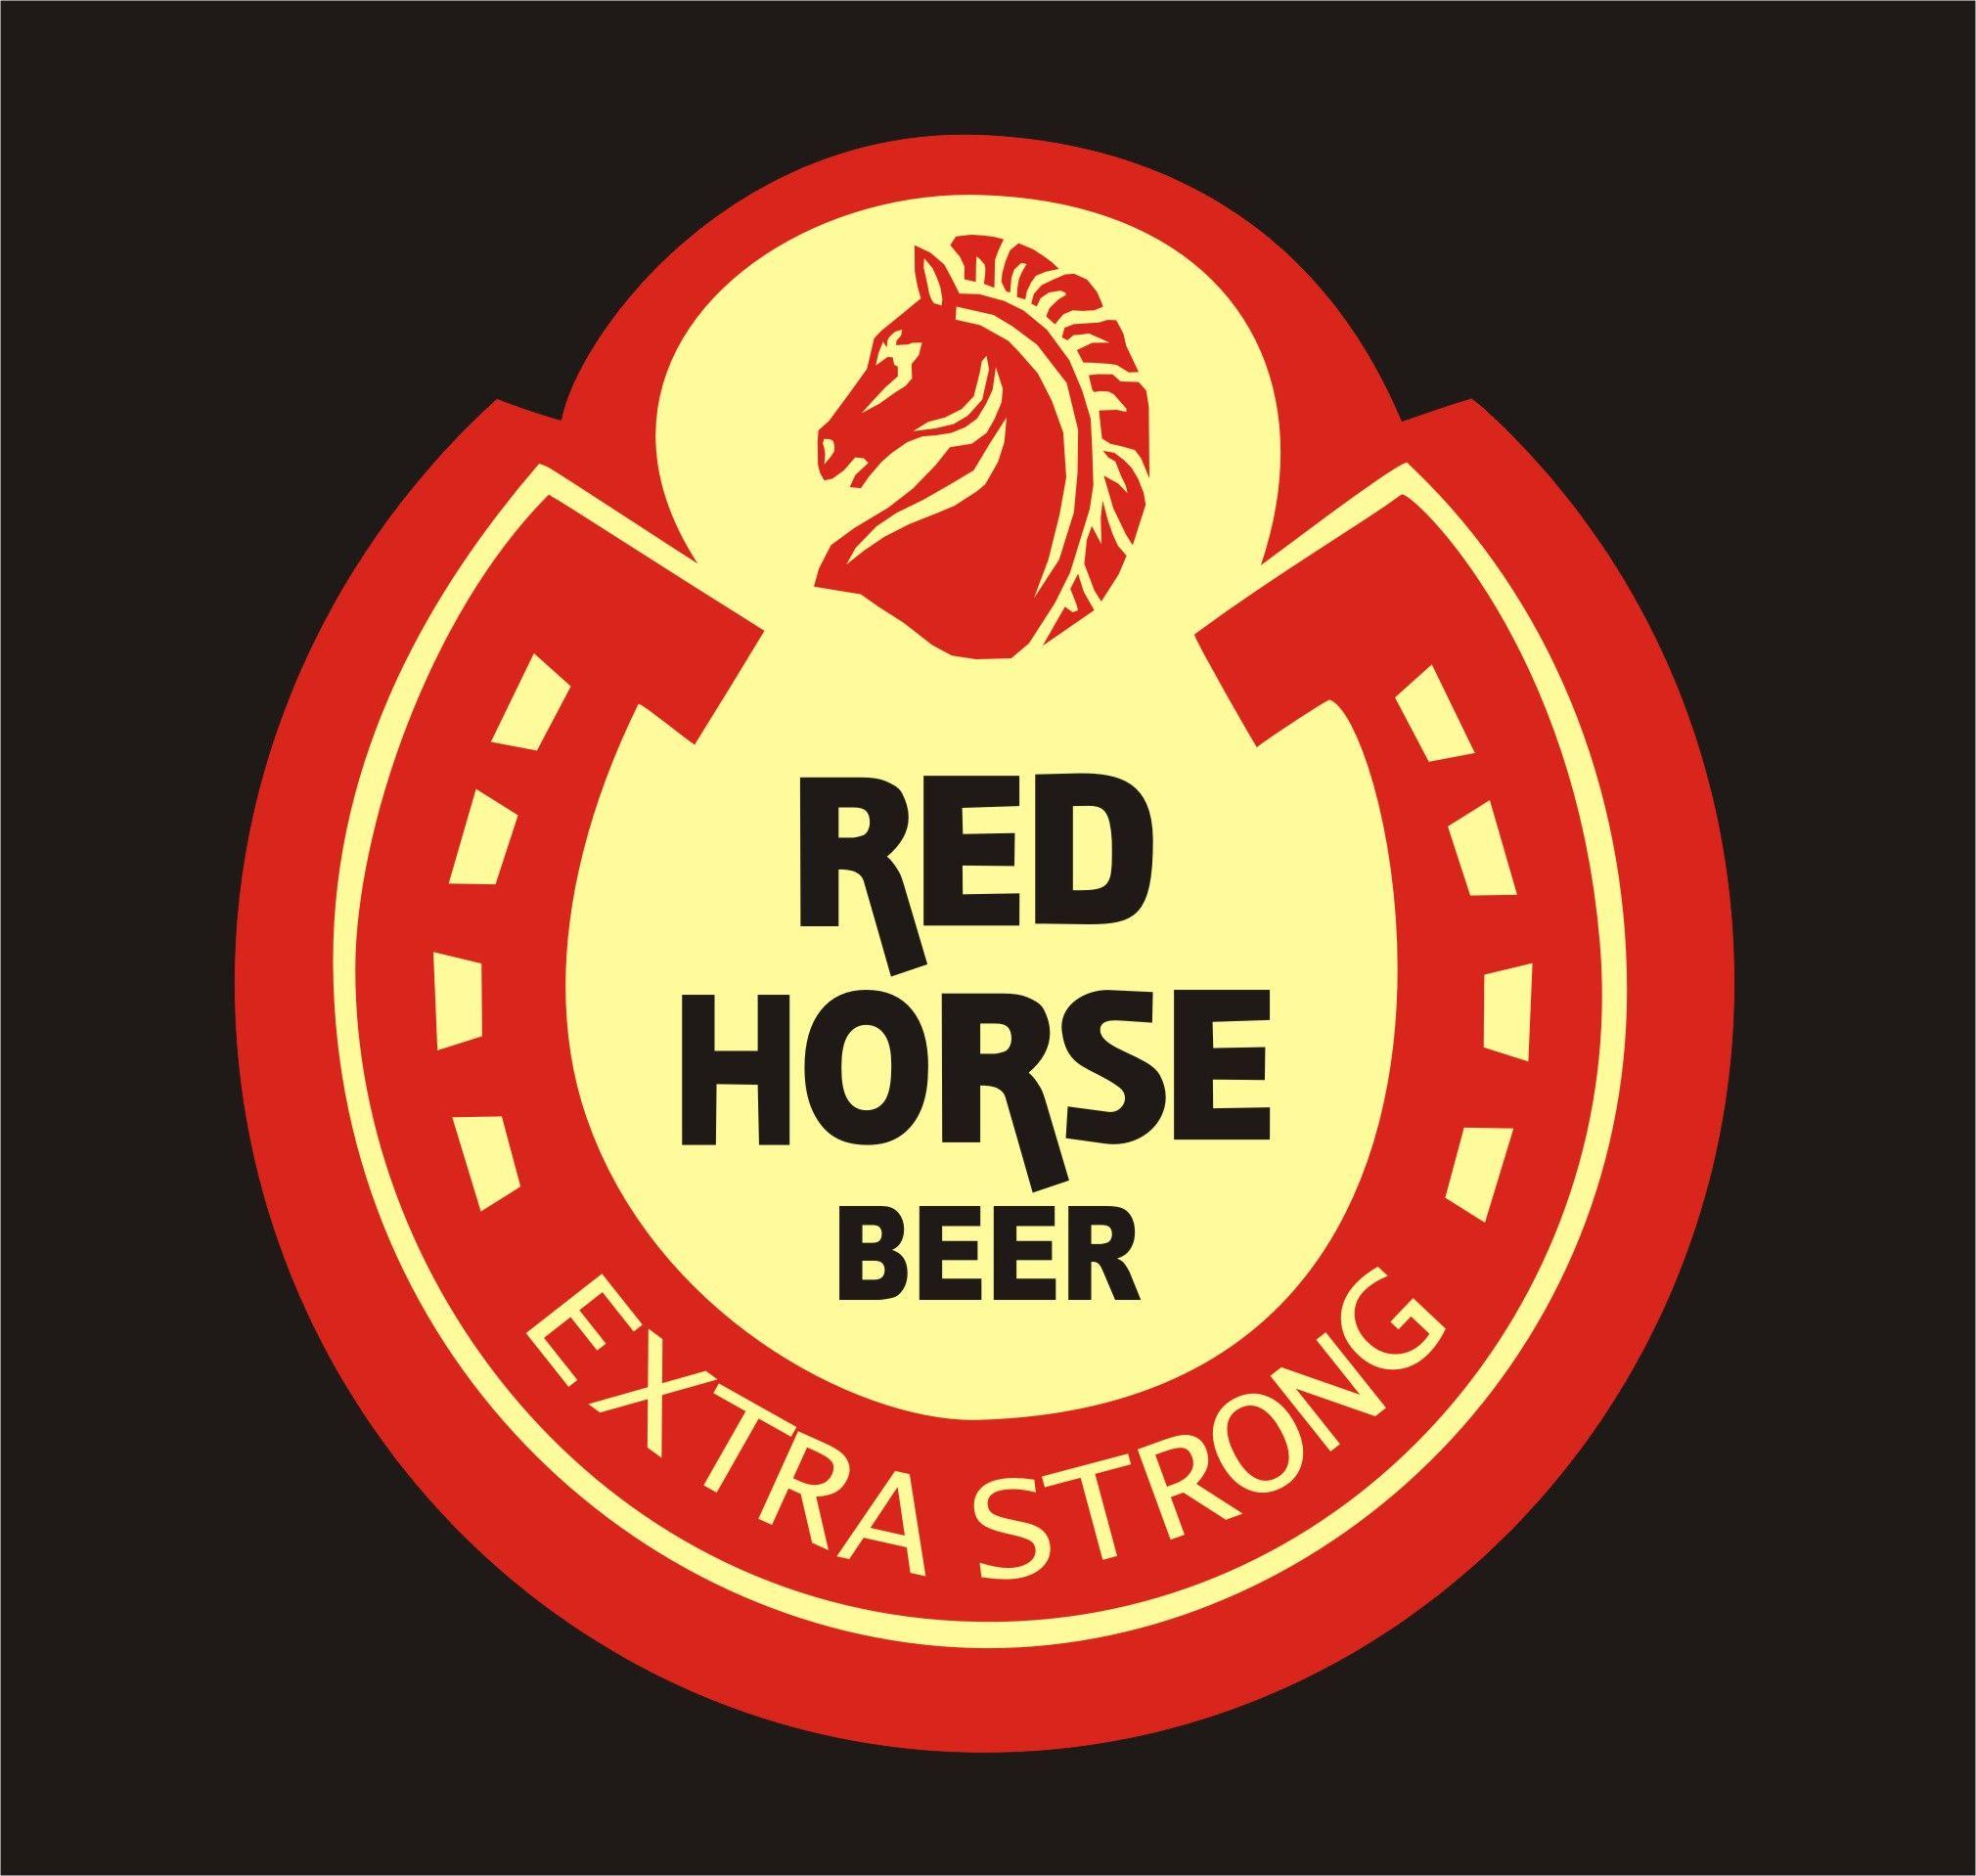 San Brand Red Logo - Now That's a Horse of a Different Color!: San Miguel's RED HORSE